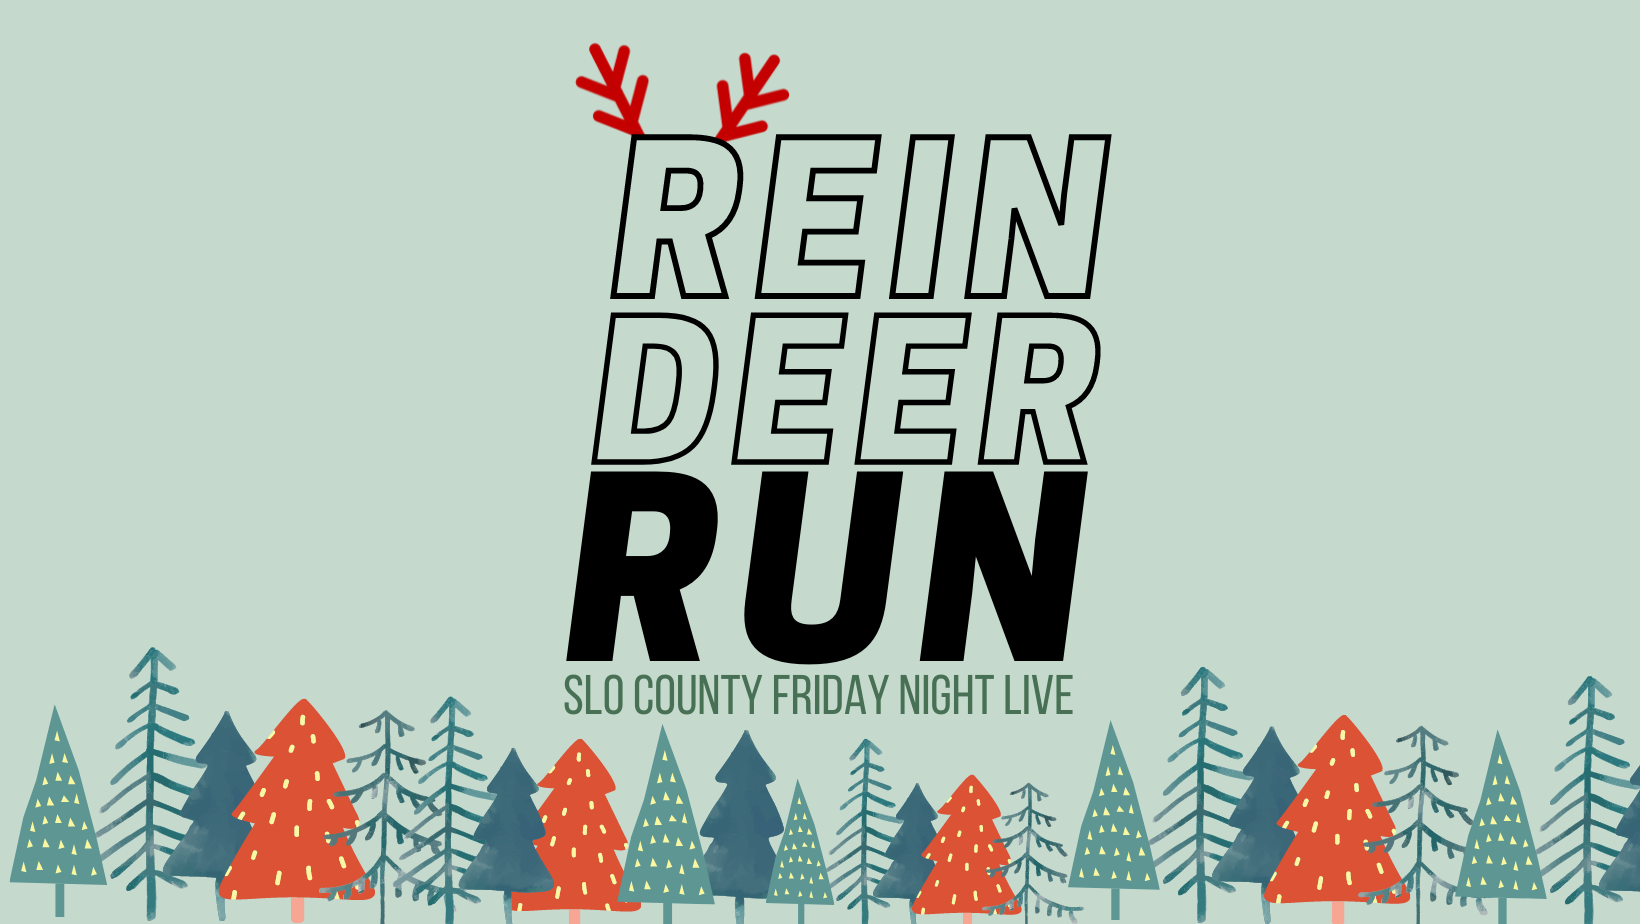 colorful pine trees with text overlay that reads "Reindeer Run SLO County Friday Night Live"